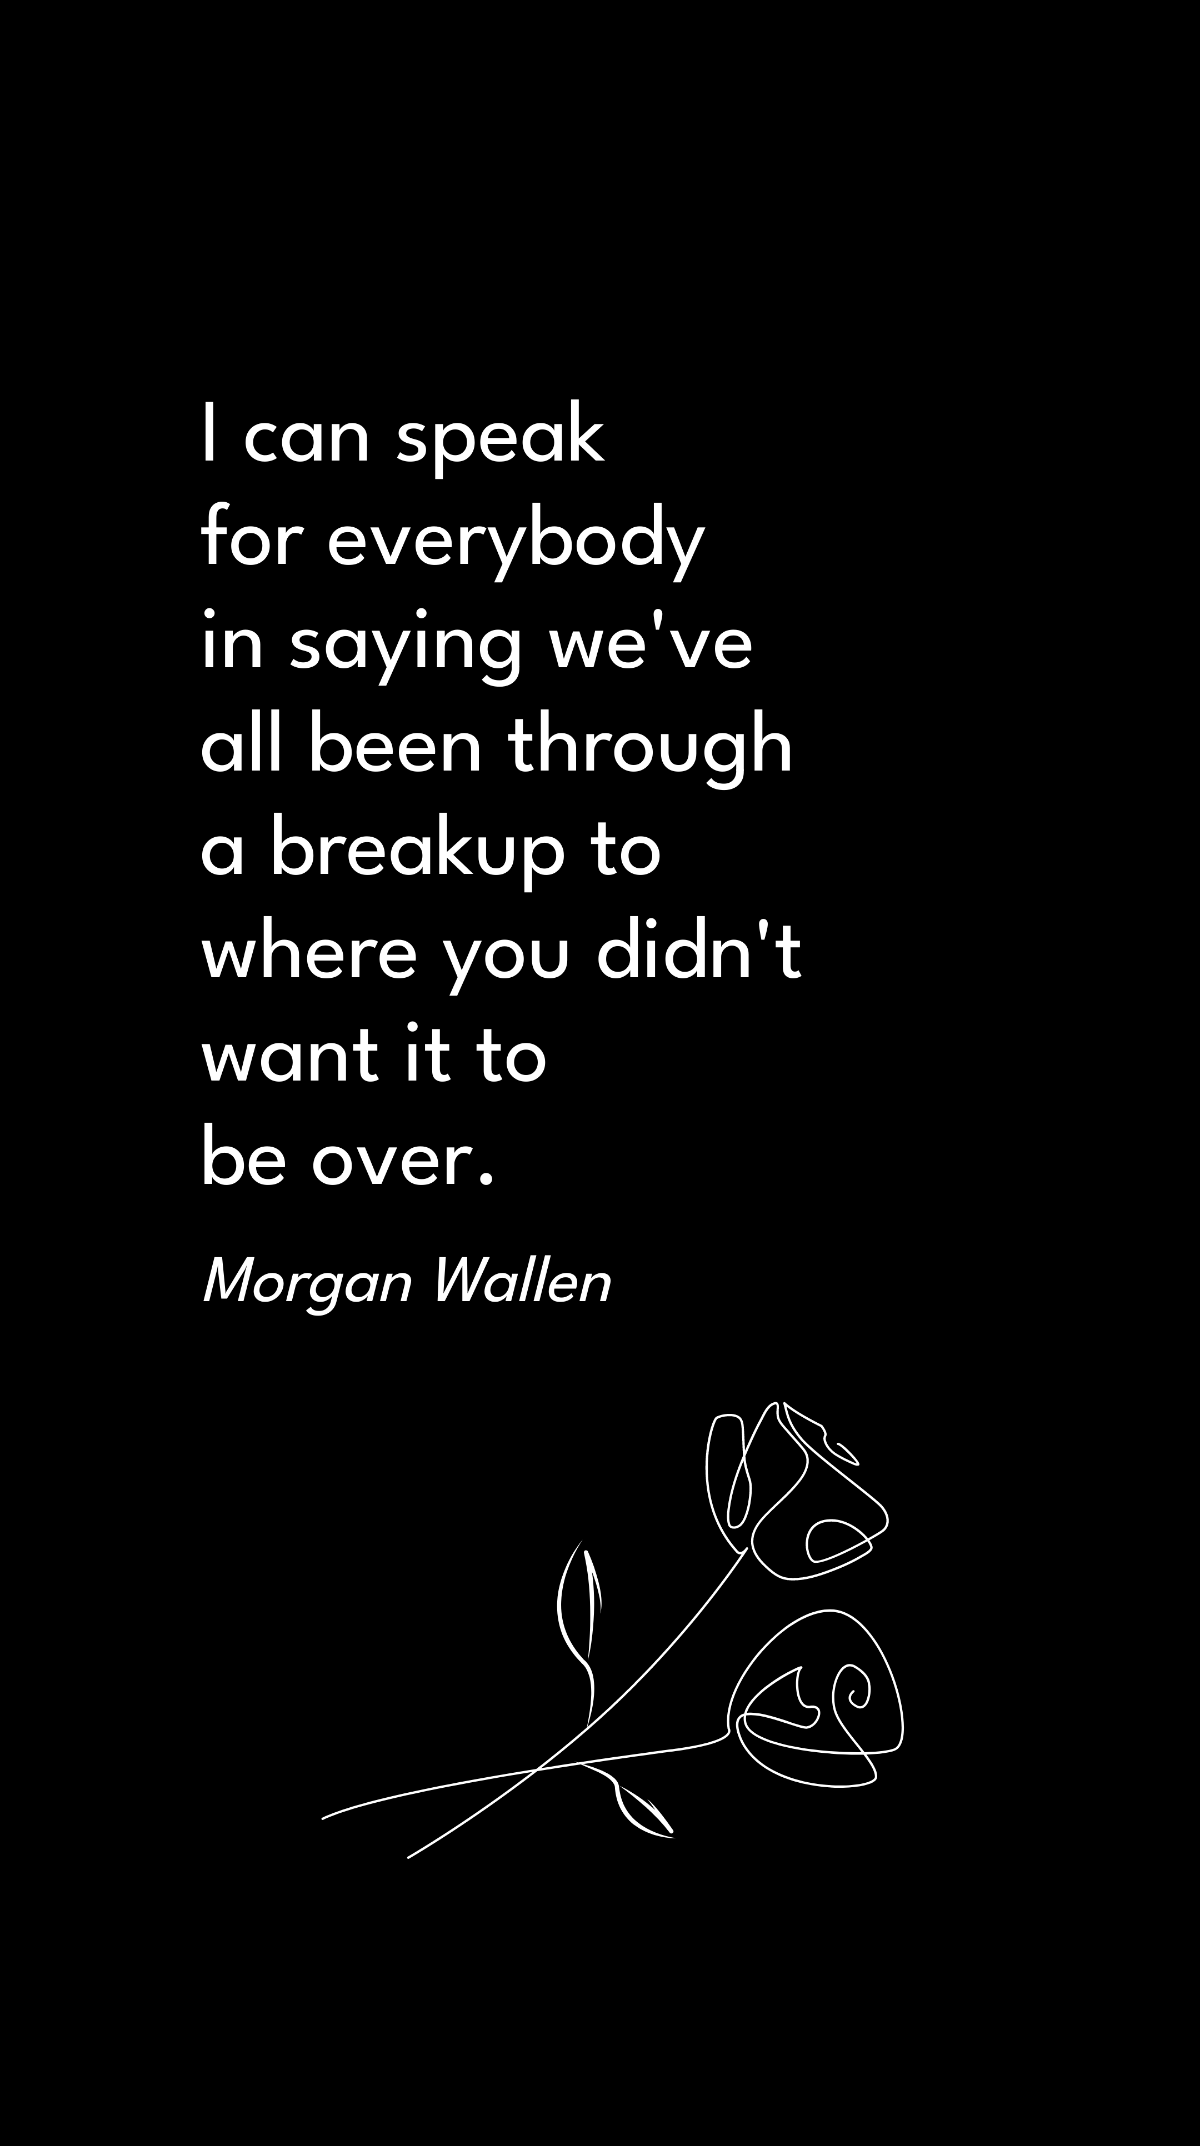 Morgan Wallen - I can speak for everybody in saying we've all been through a breakup to where you didn't want it to be over.